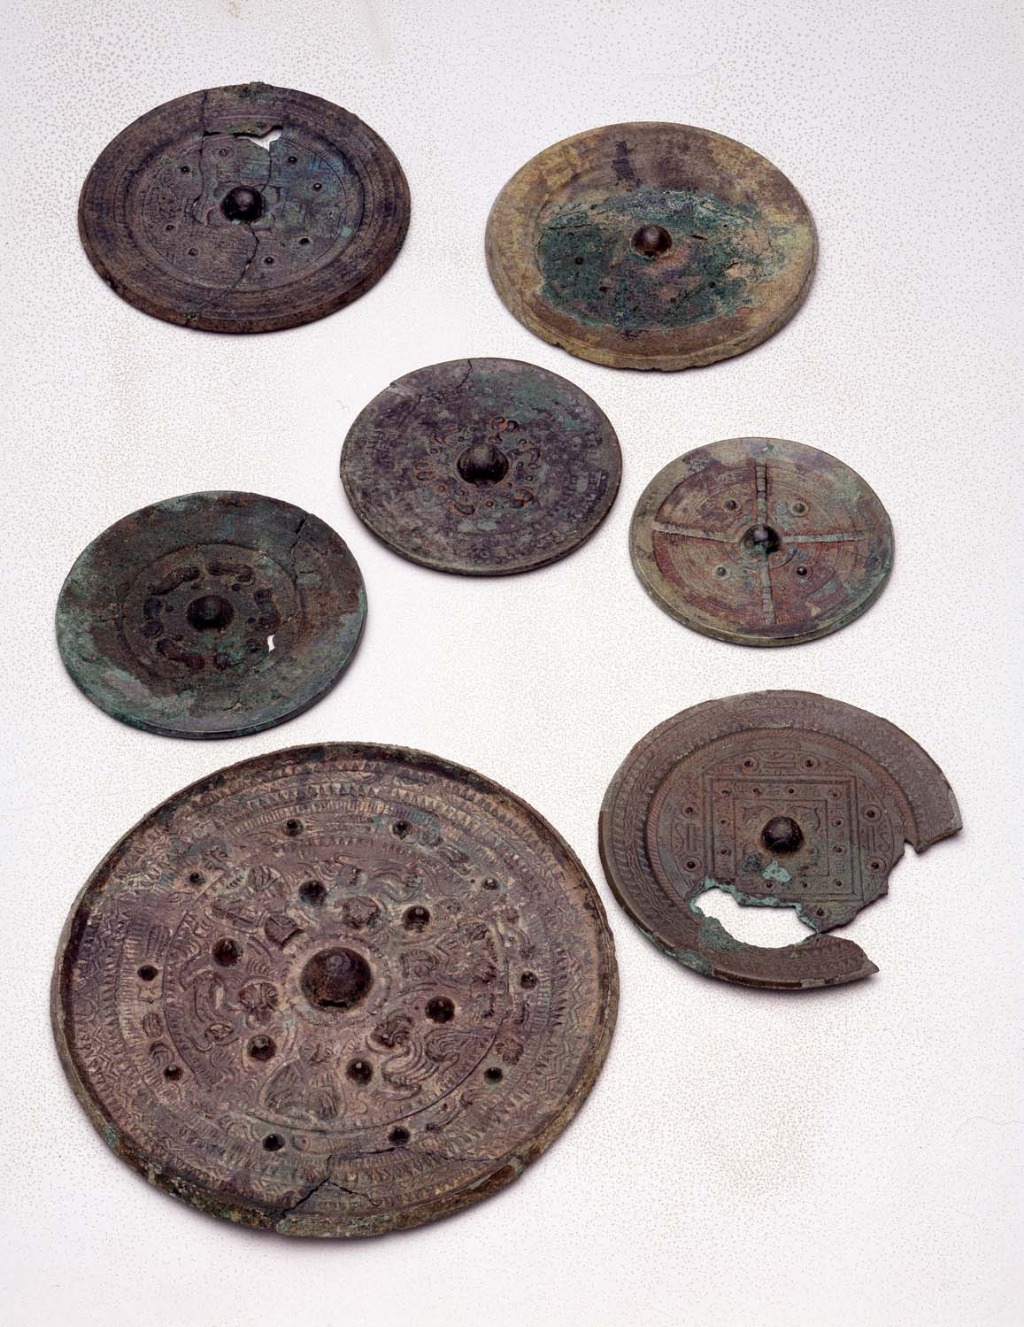 Unearthed objects from the Saitobaru Burial Mounds